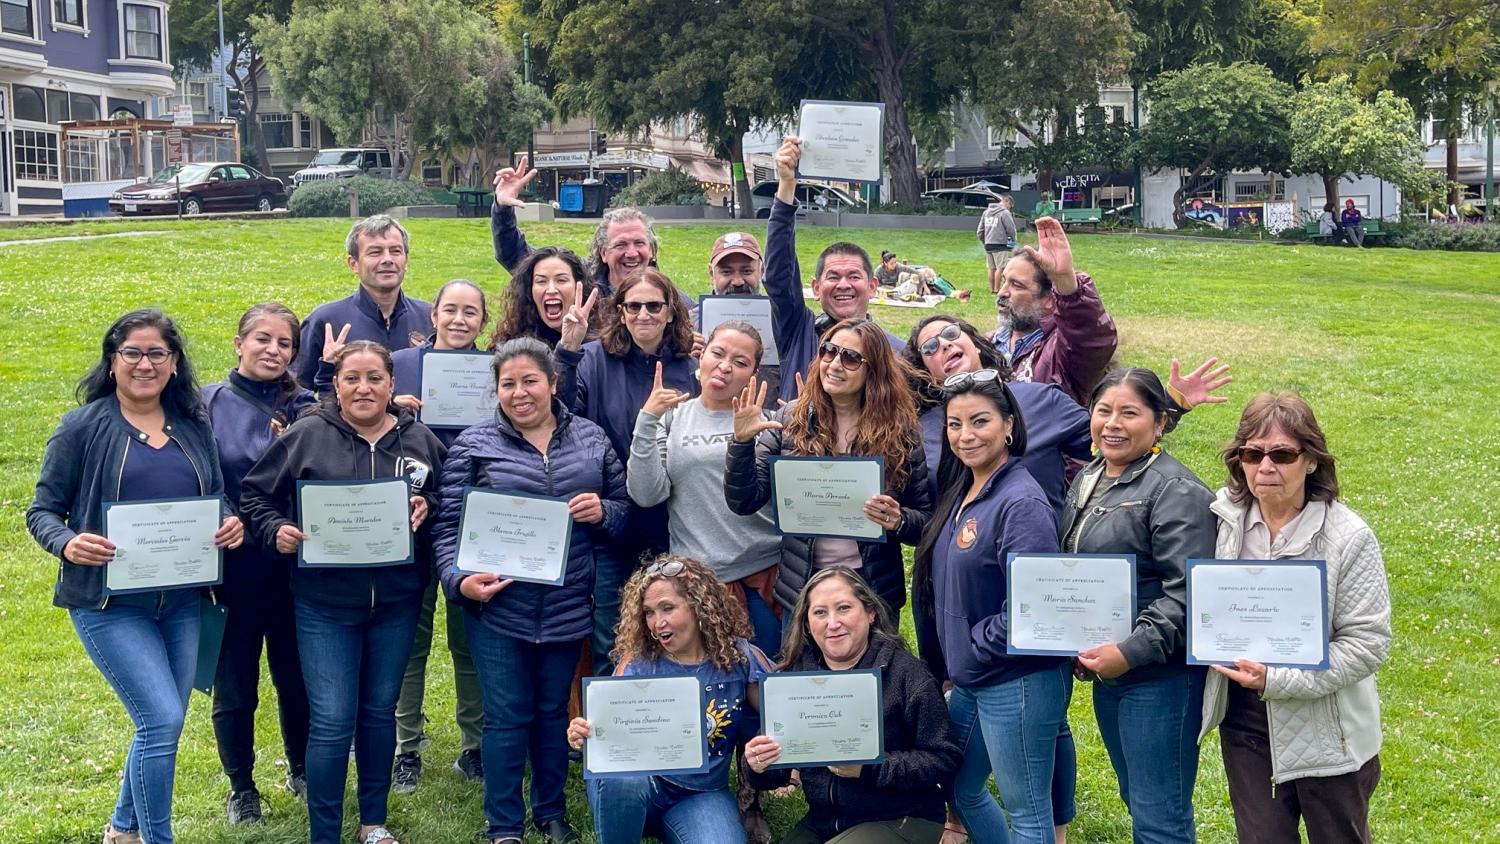 A group of Promotores (community health workers) make funny faces as they gather in a park to take a photo. They are joined with personnel from San Francisco Department of Public Health and UCSF Latinx Center of Excellence